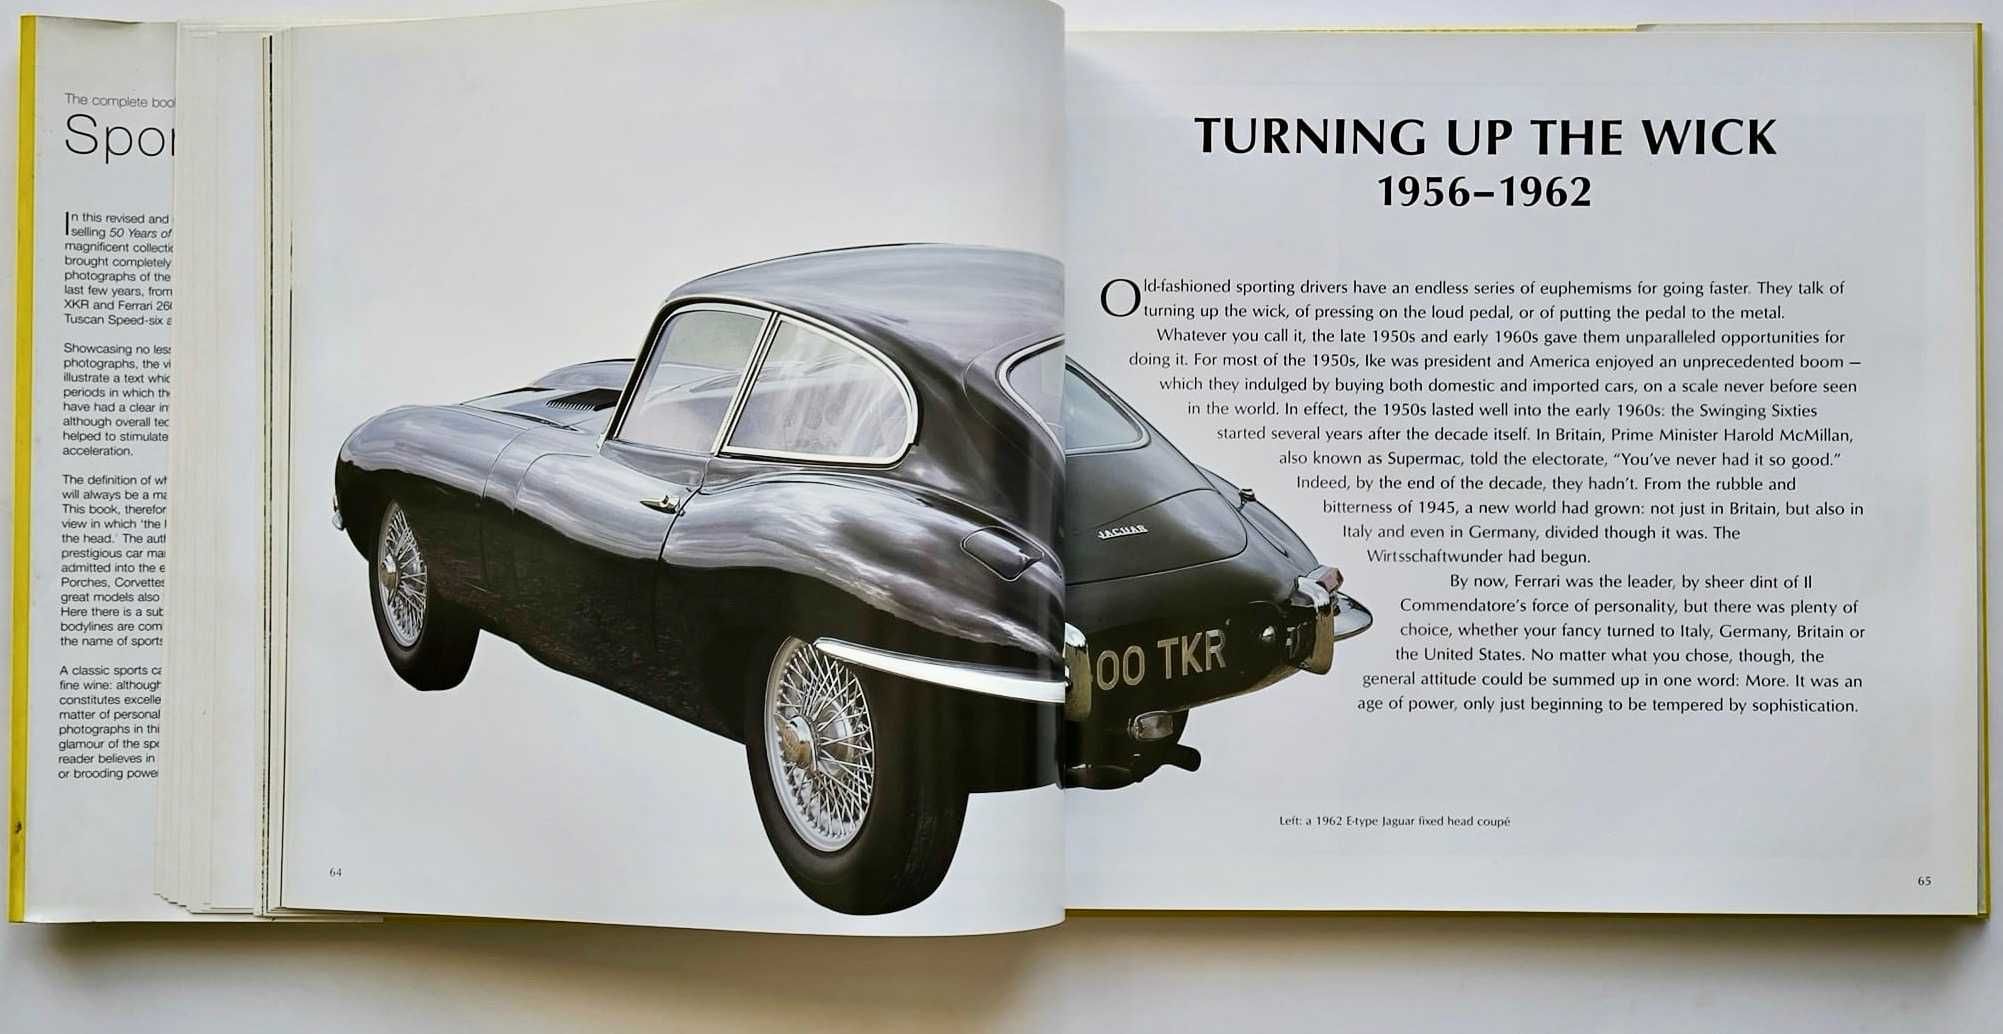 Livro "The Complete Book of Sports Cars"